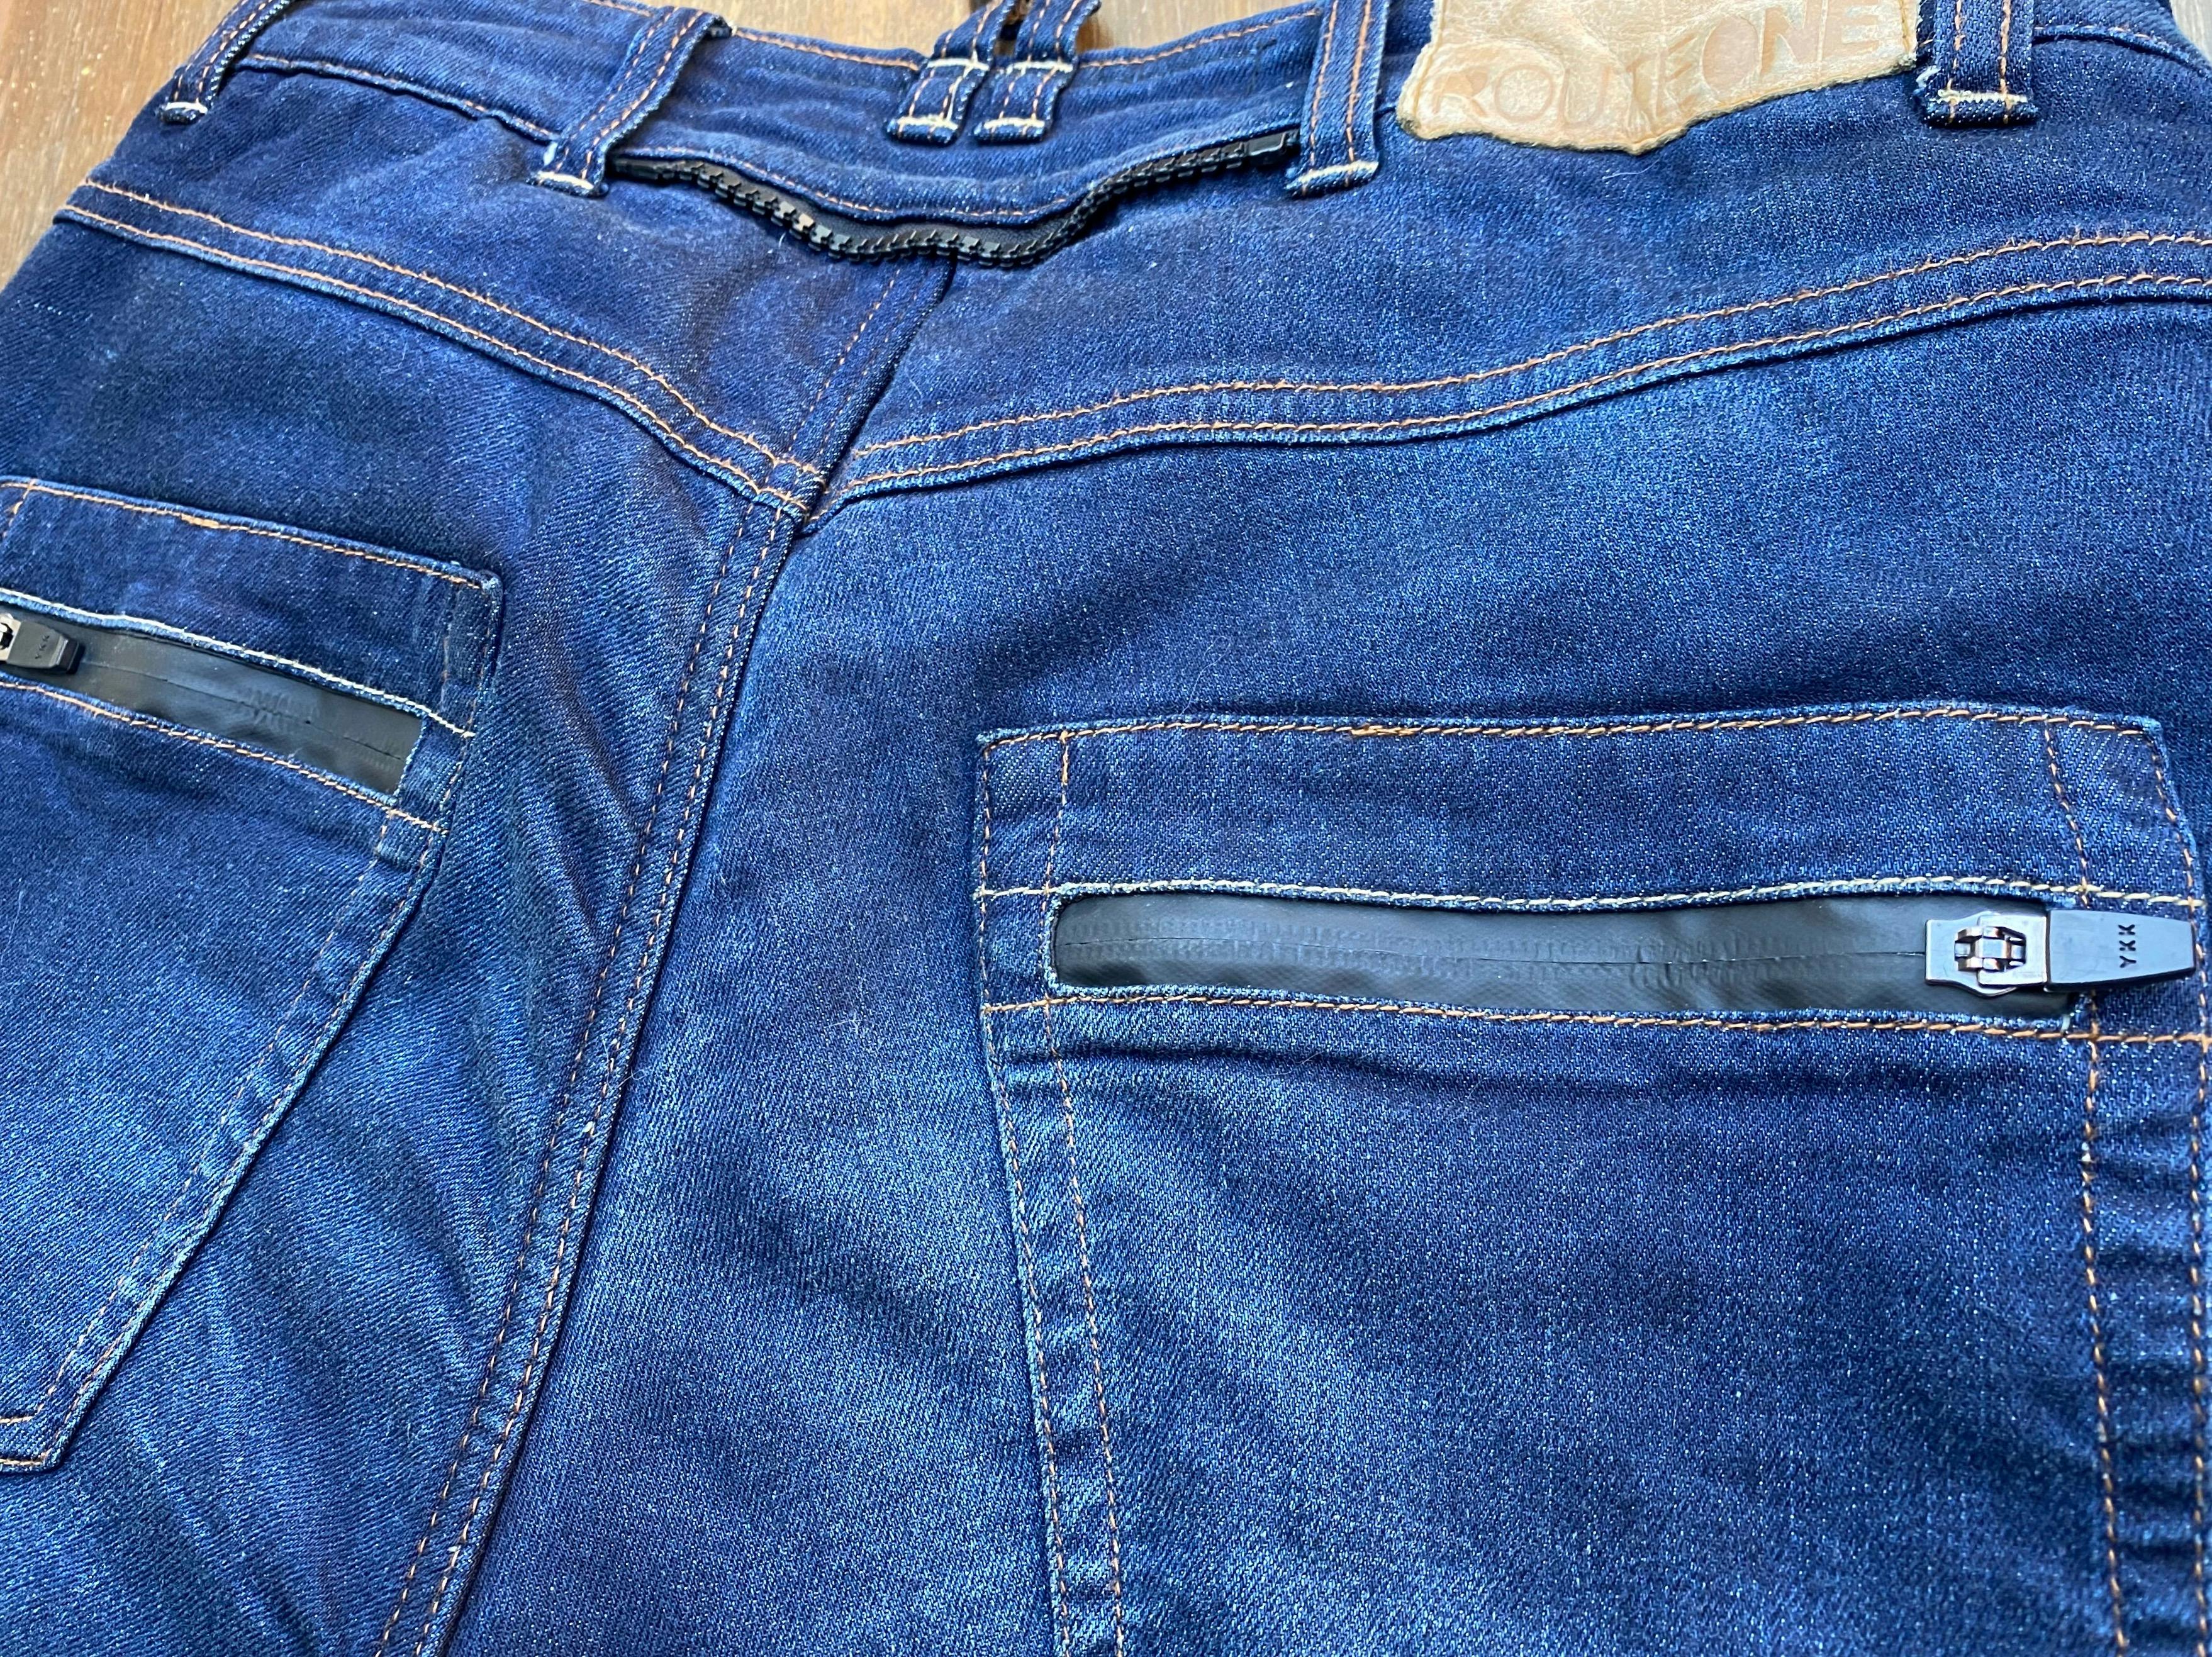 Heat welded tape to create a waterproof pocket on the back of a pair of blue merlin Mason jeans